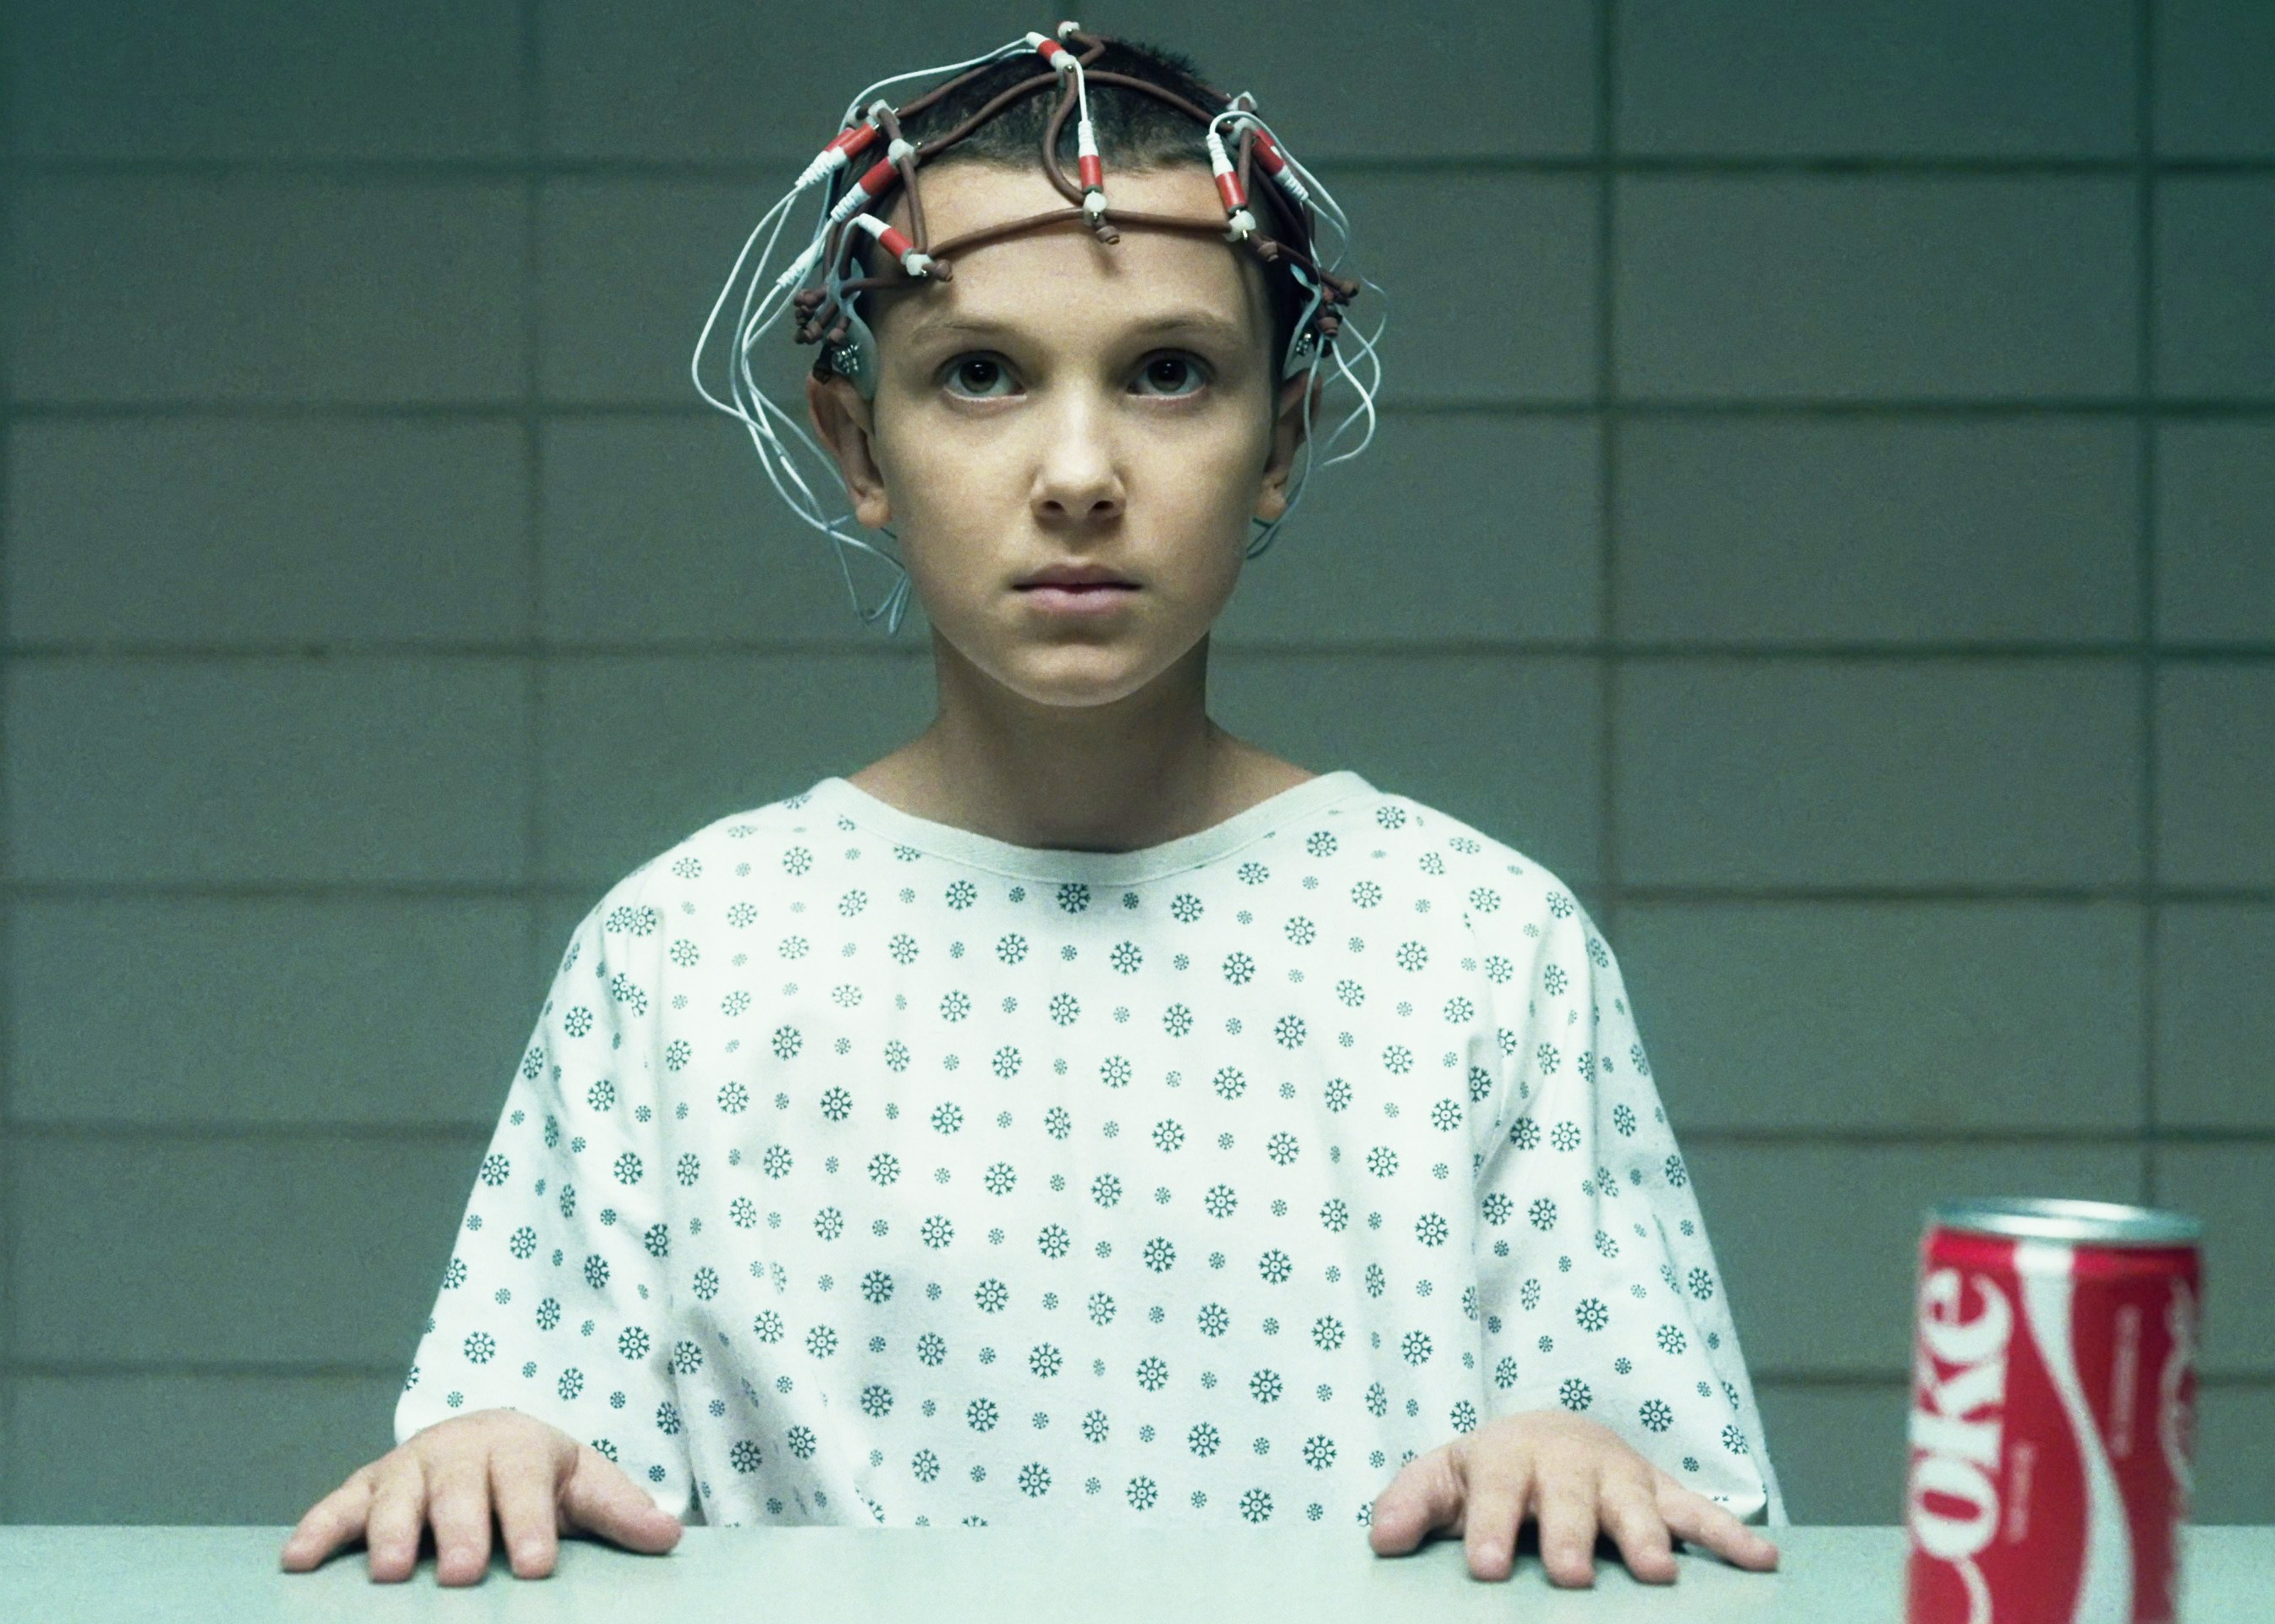 The experiments inspired a chilling storyline in Stranger Things